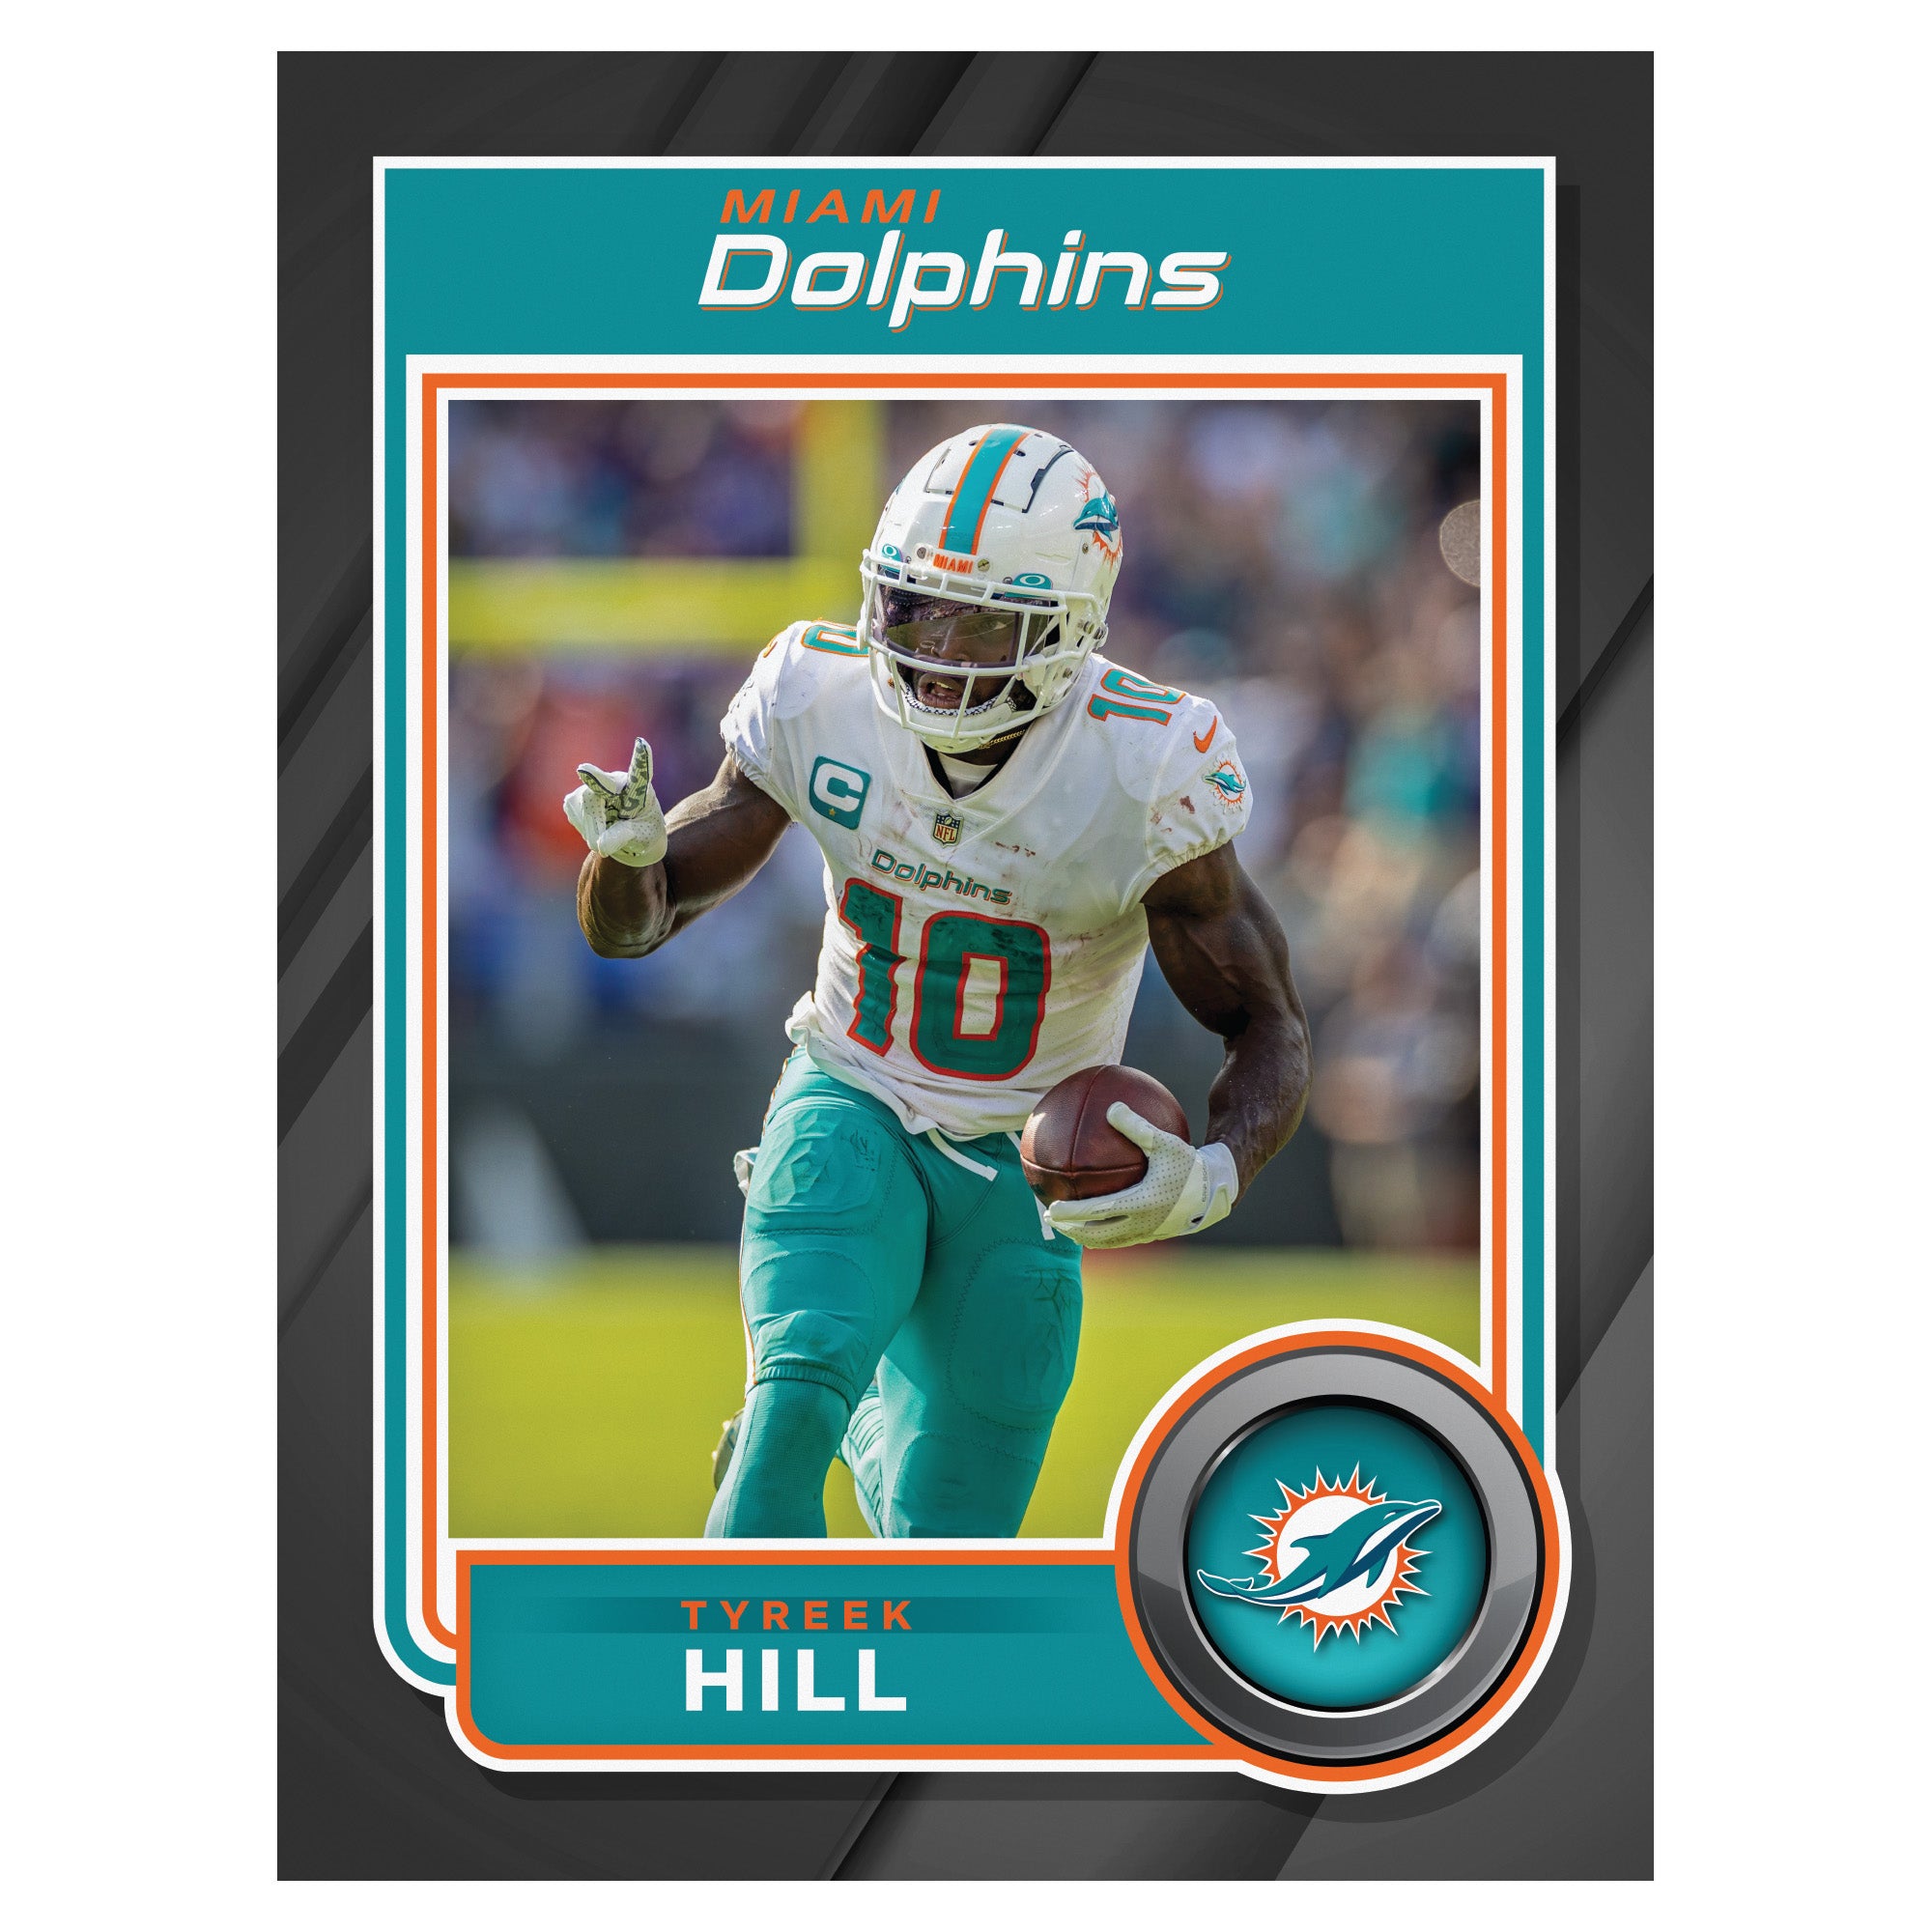 Dolphins collectible player jersey